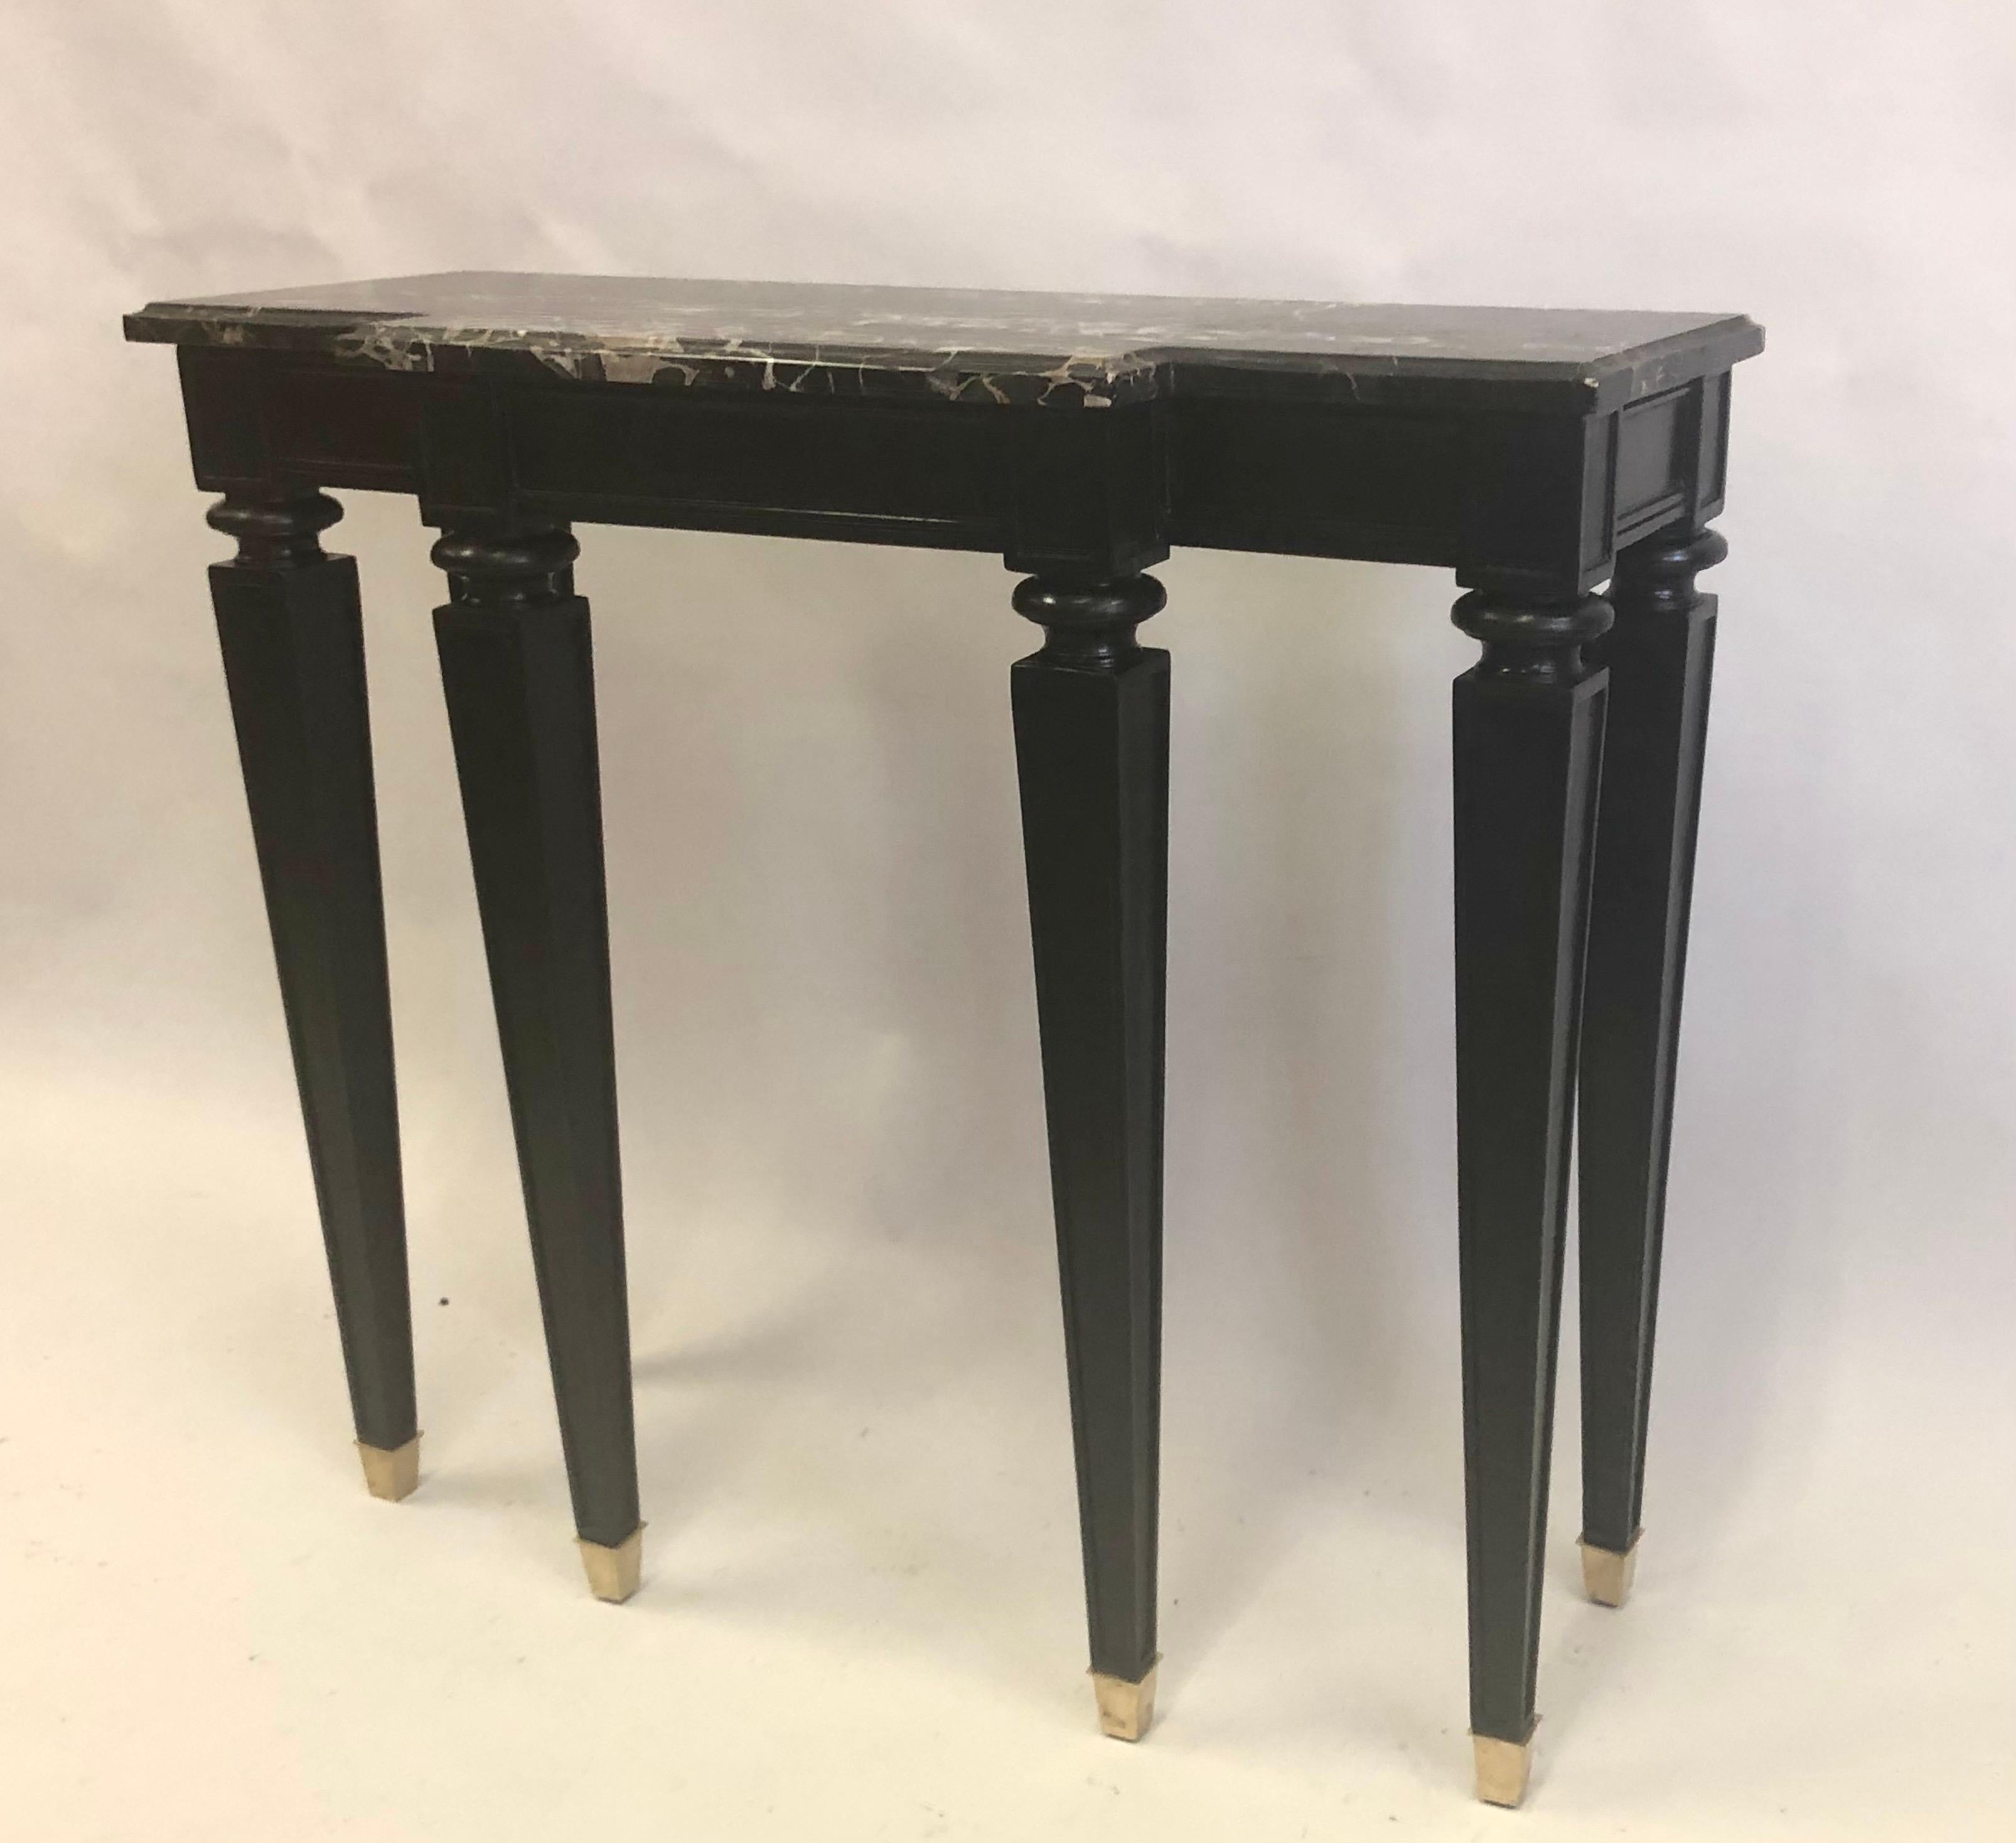 Rare, refined and timeless French Mid-Century Modern neoclassical console by Andre Arbus circa 1940. The piece features a dramatic mannerist architectural model as it is set upon 6 hand carved legs, each fluted with strong border lines and